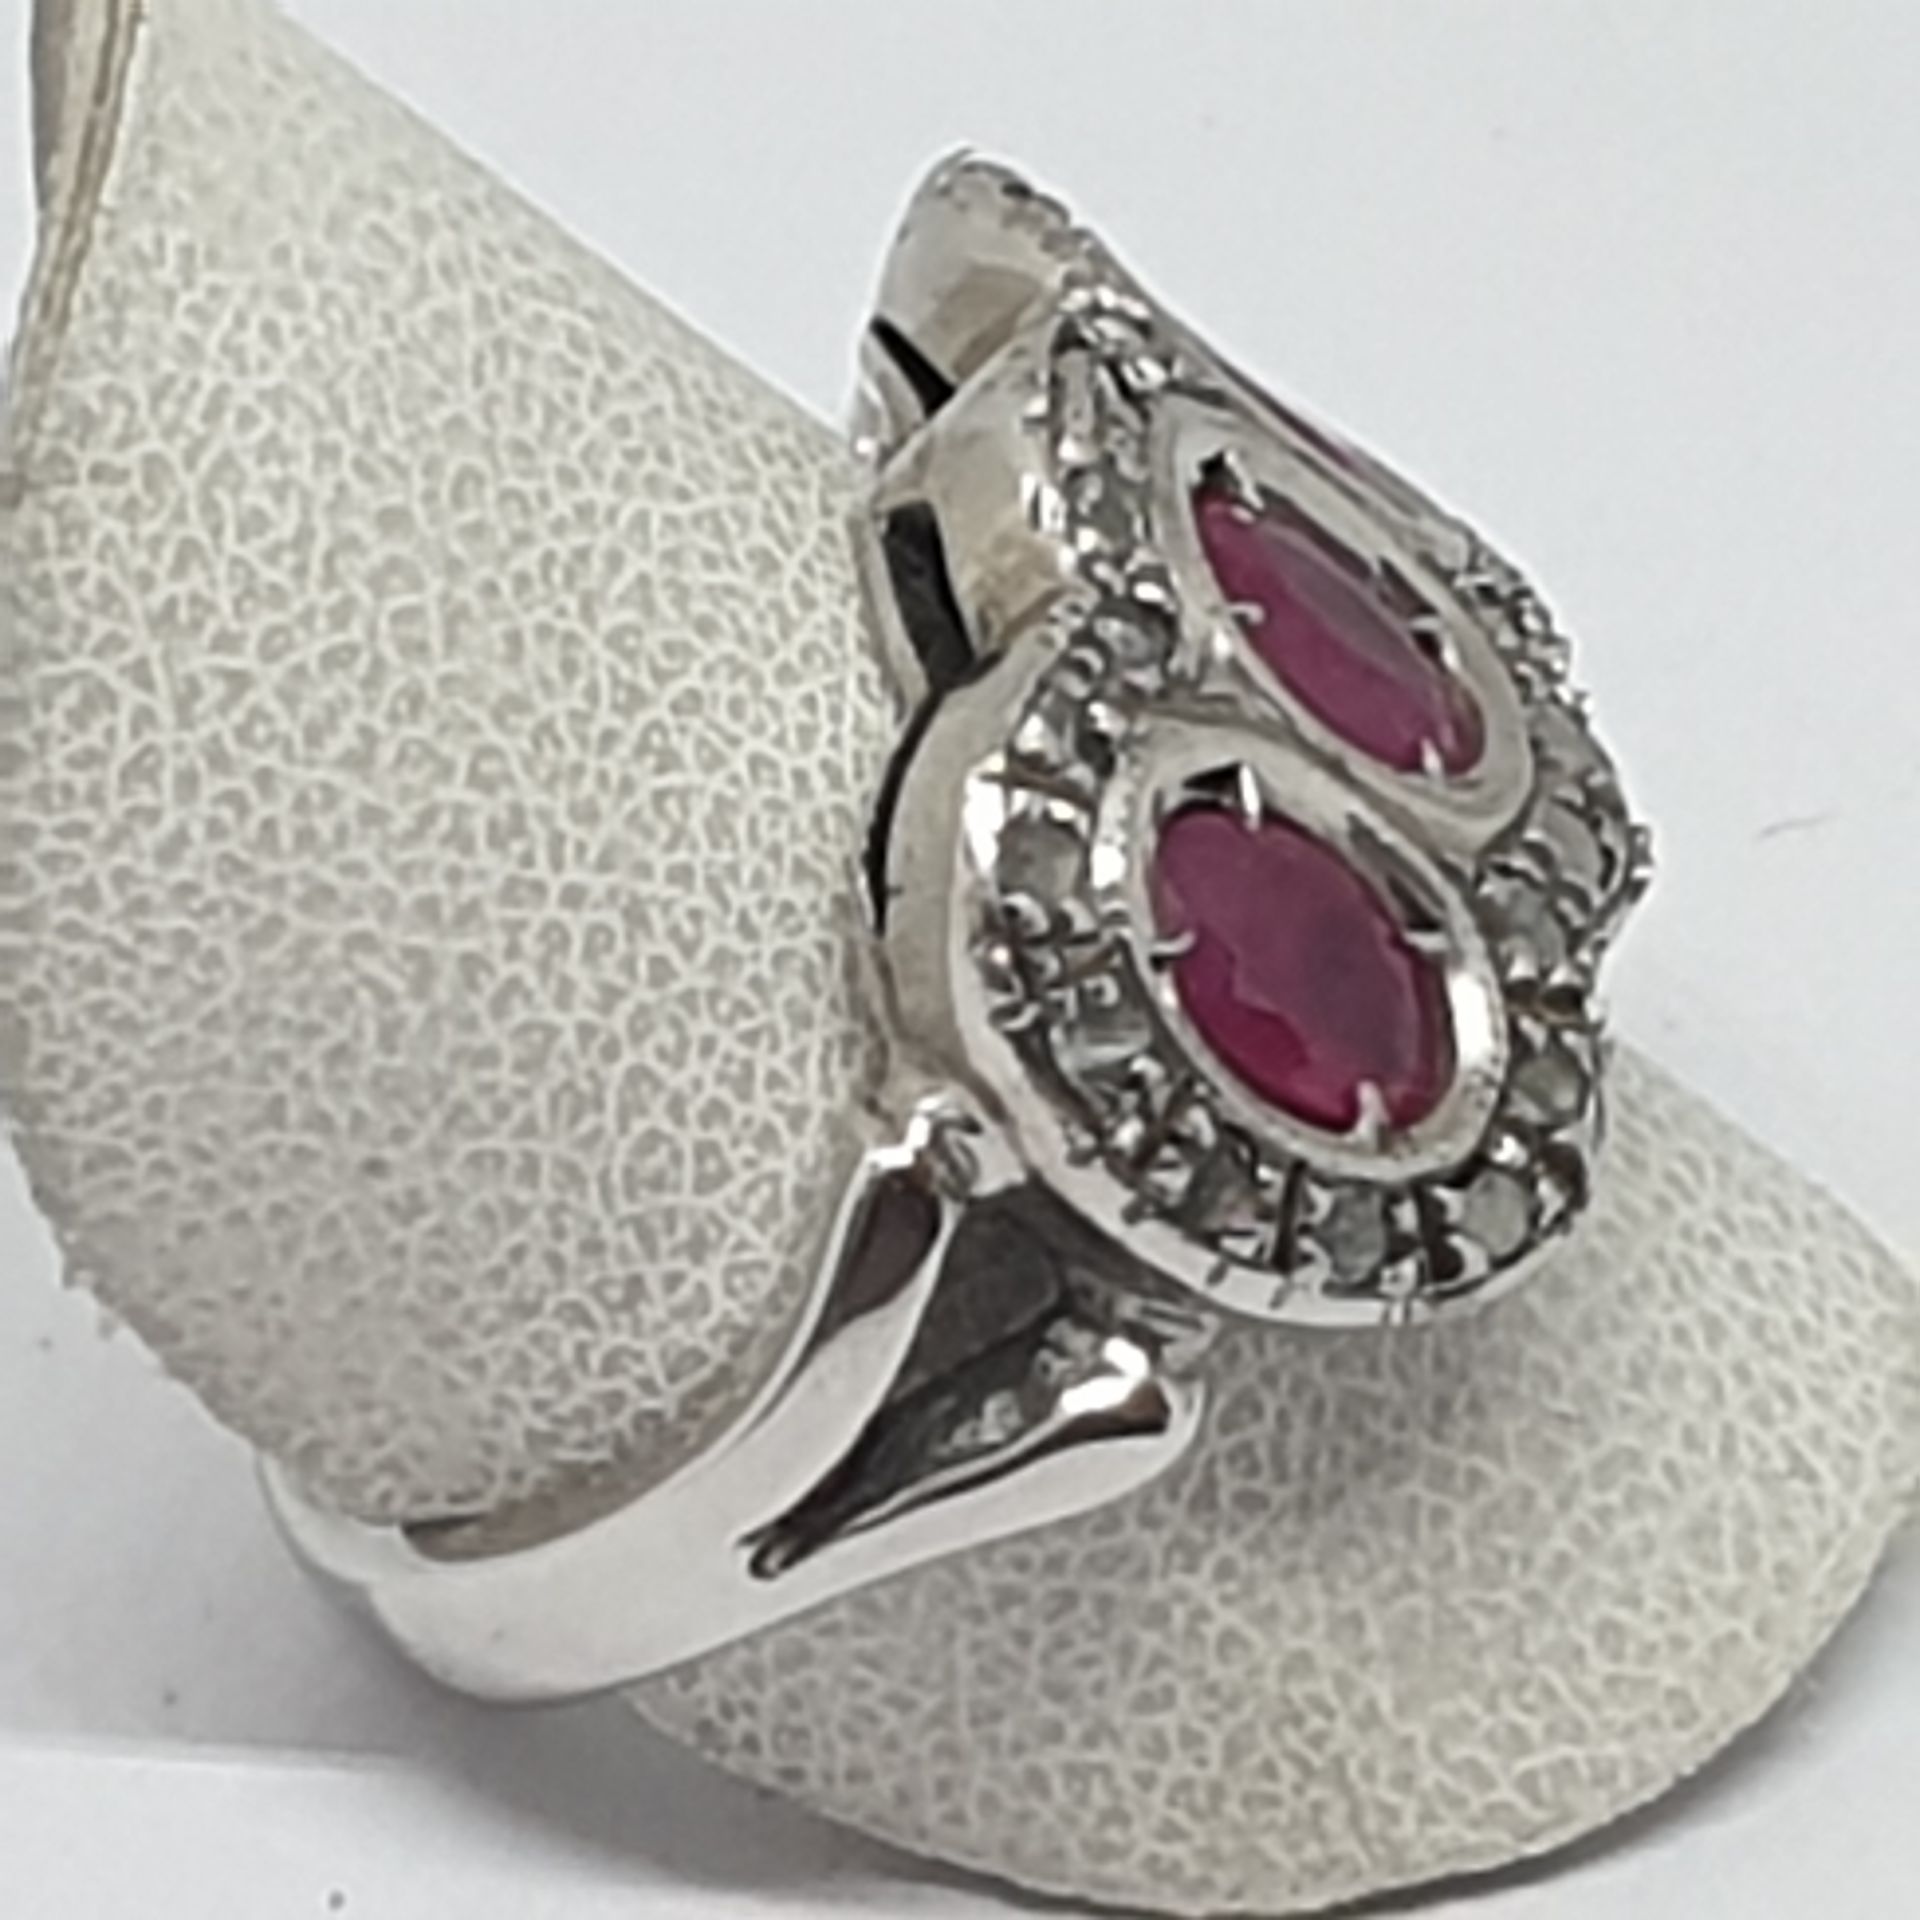 18 K GOLD RING 9.8 WITH 4 CENTRAL OVAL RUBIES FROM APPROXIMATELY 1.12 TOTAL CTS AND ROSETTE - Bild 2 aus 4